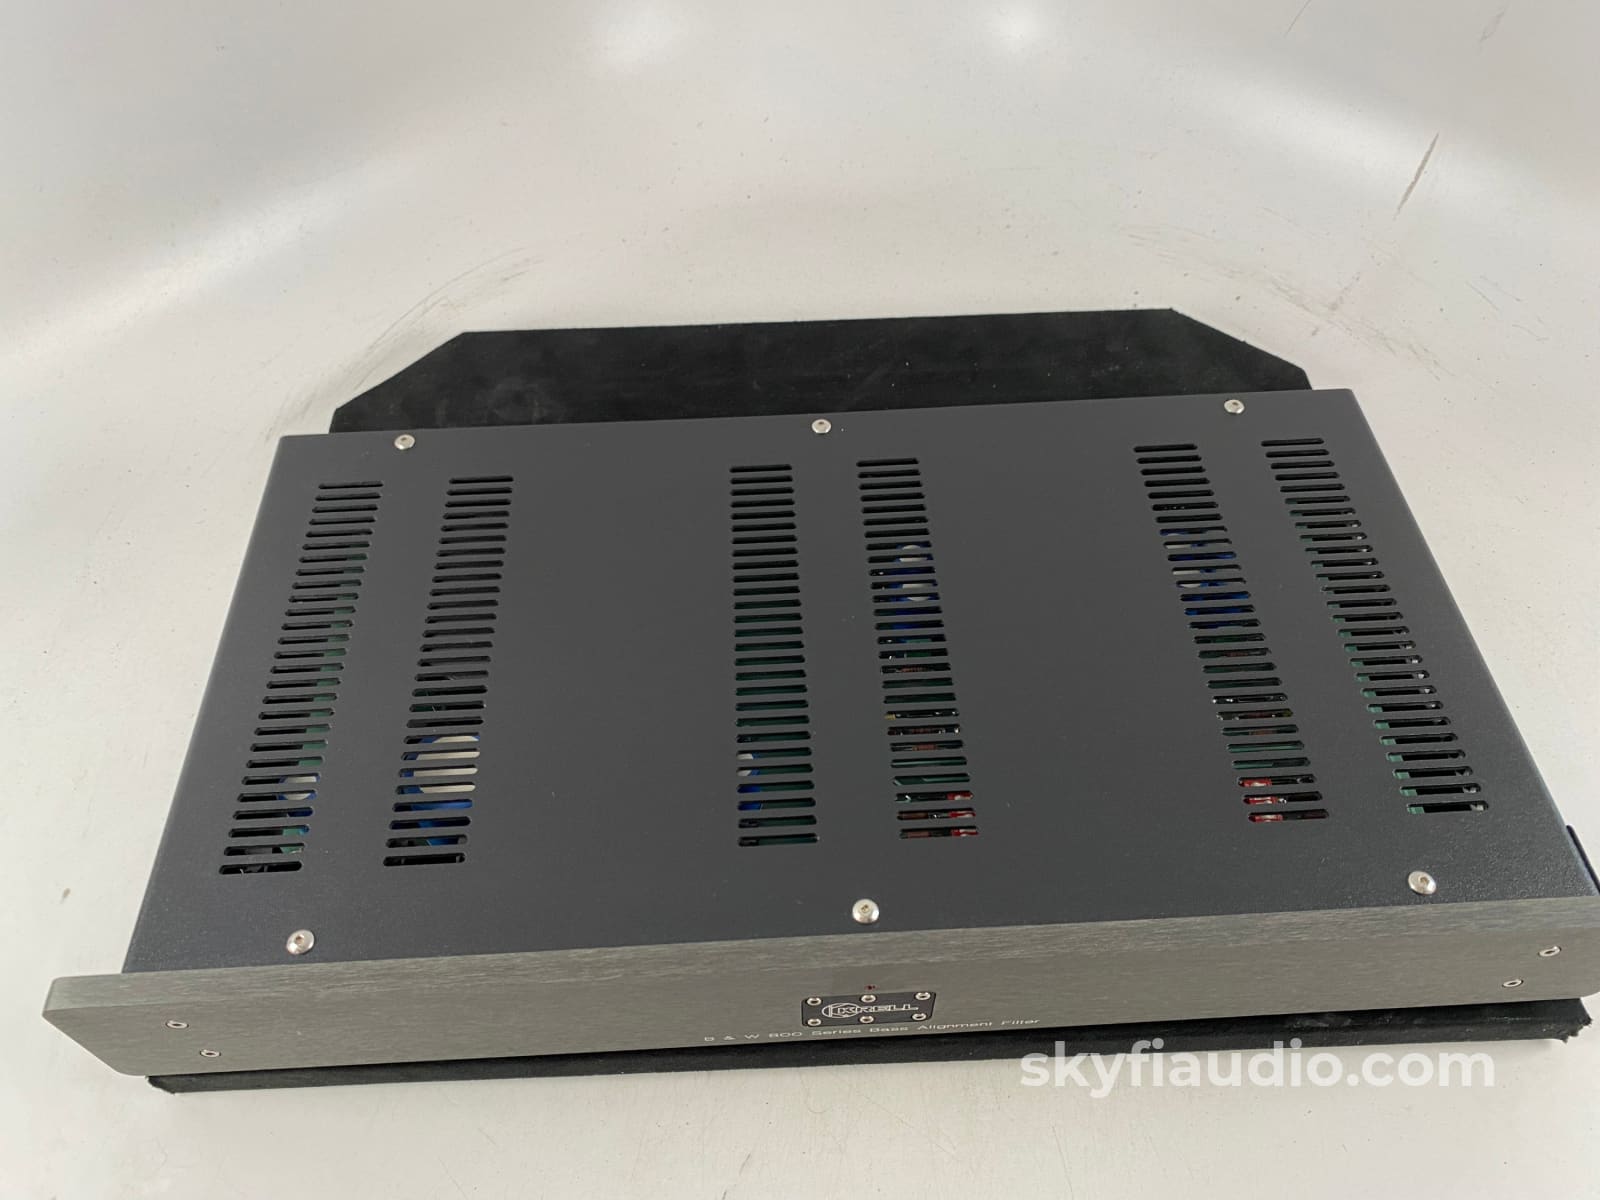 Krell Bass Alignment Filter For Bowers & Wilkins Matrix 800 Series Speakers - Rare Equalizer